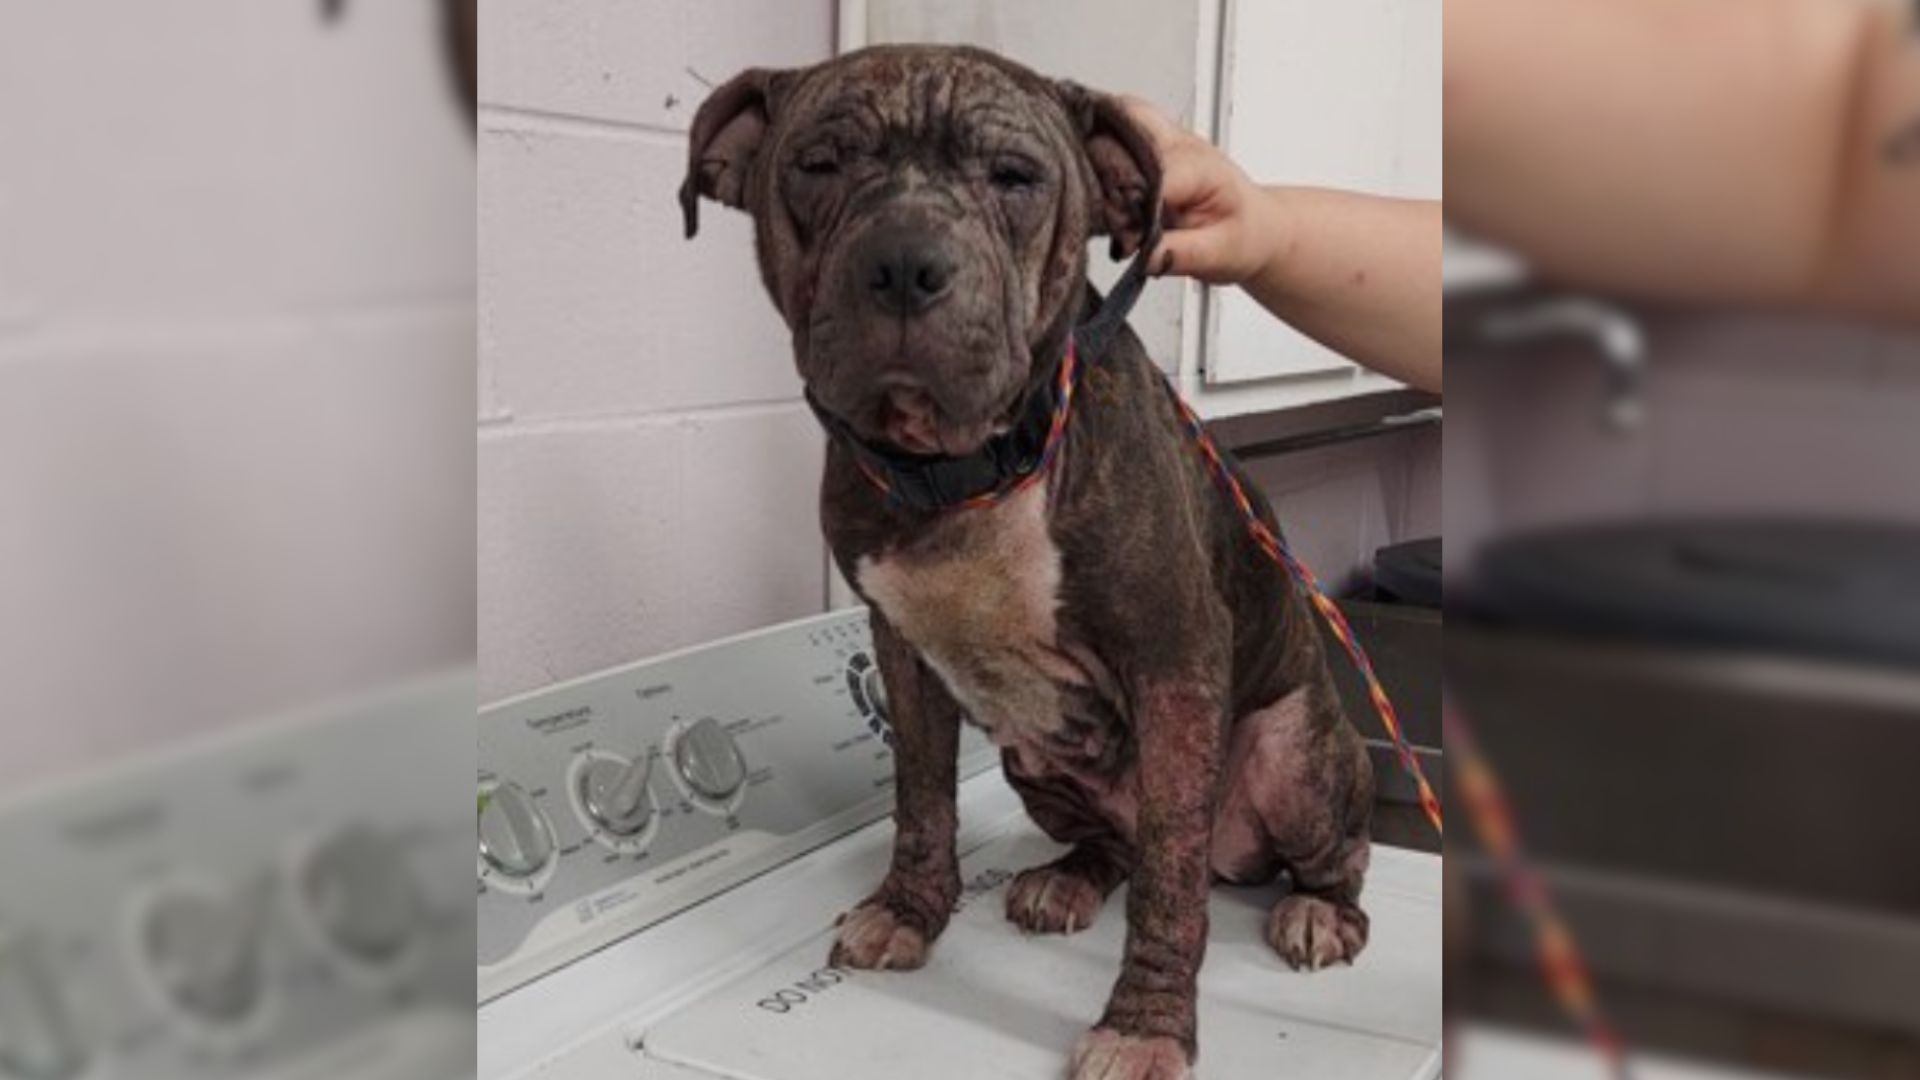 People Shocked To Learn The Real Breed Of A Rescue Dog Found In Terrible Condition